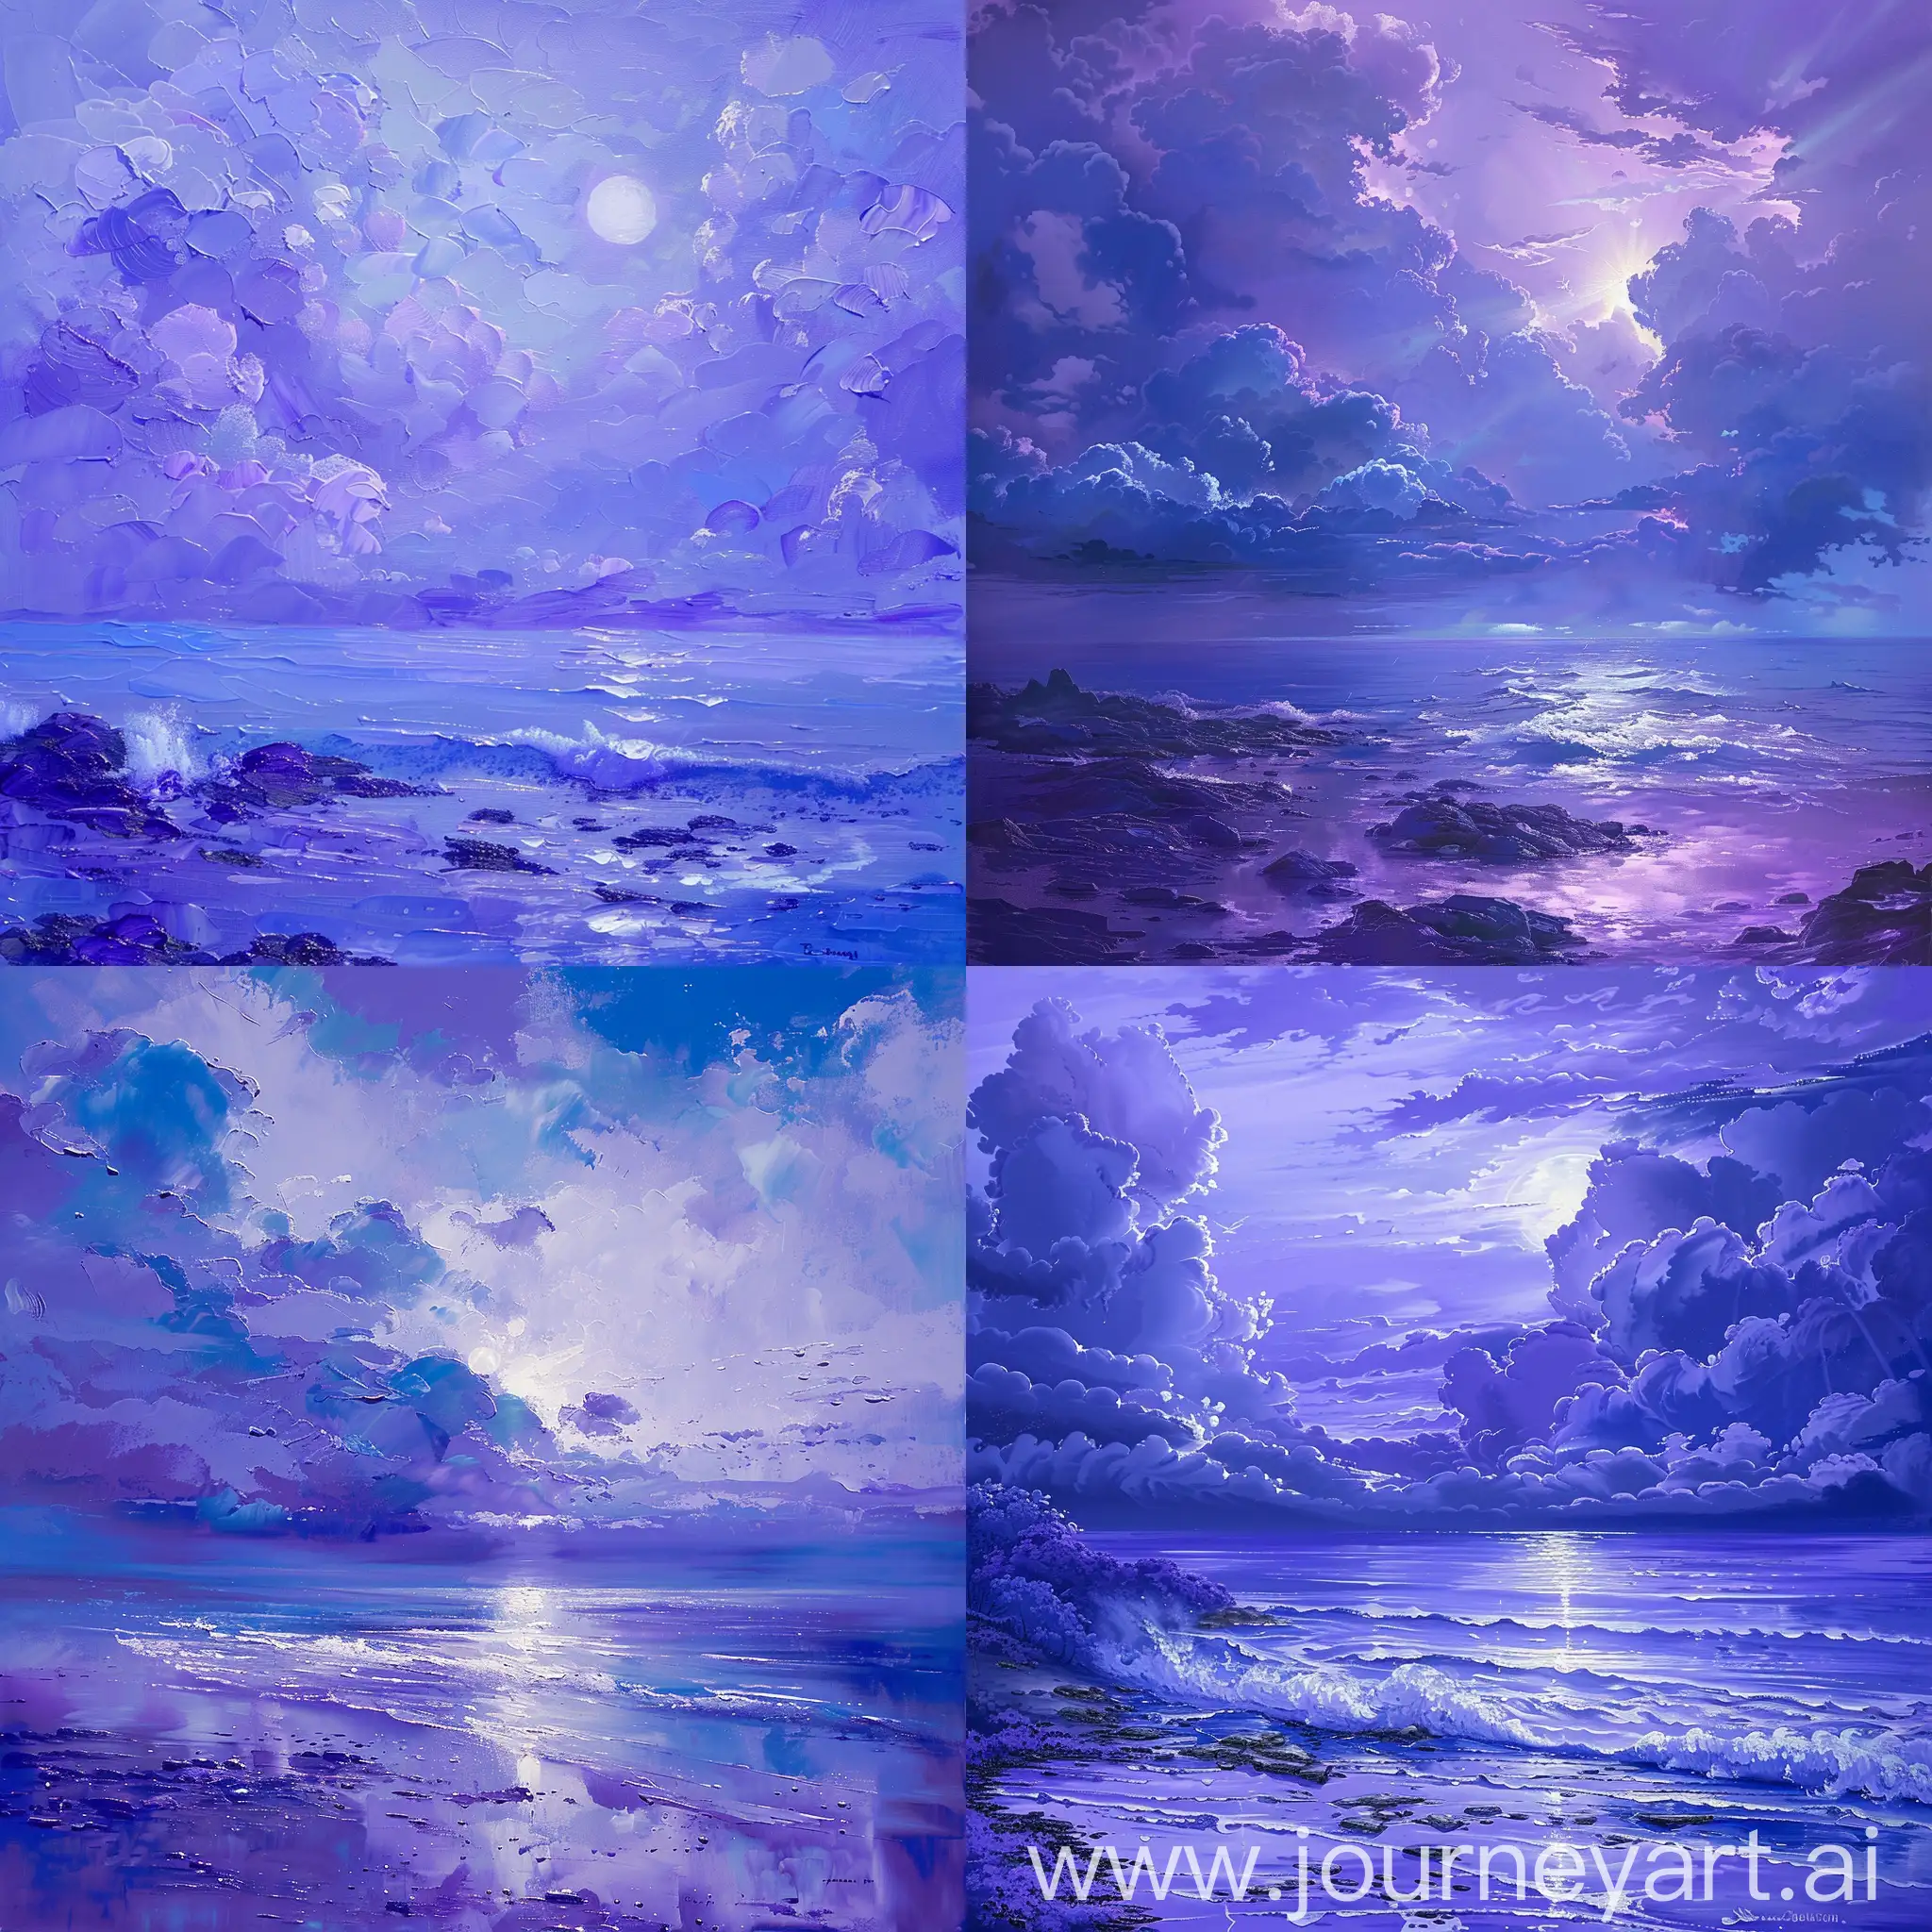 Landscape in purple and blue colors. Blue clouds and calm sea. Twilight atmosphere after the rain. The sun shines a little through the clouds. In the foreground are small stones, which the waves are crashing on. Serenity and tranquility. Expressionism